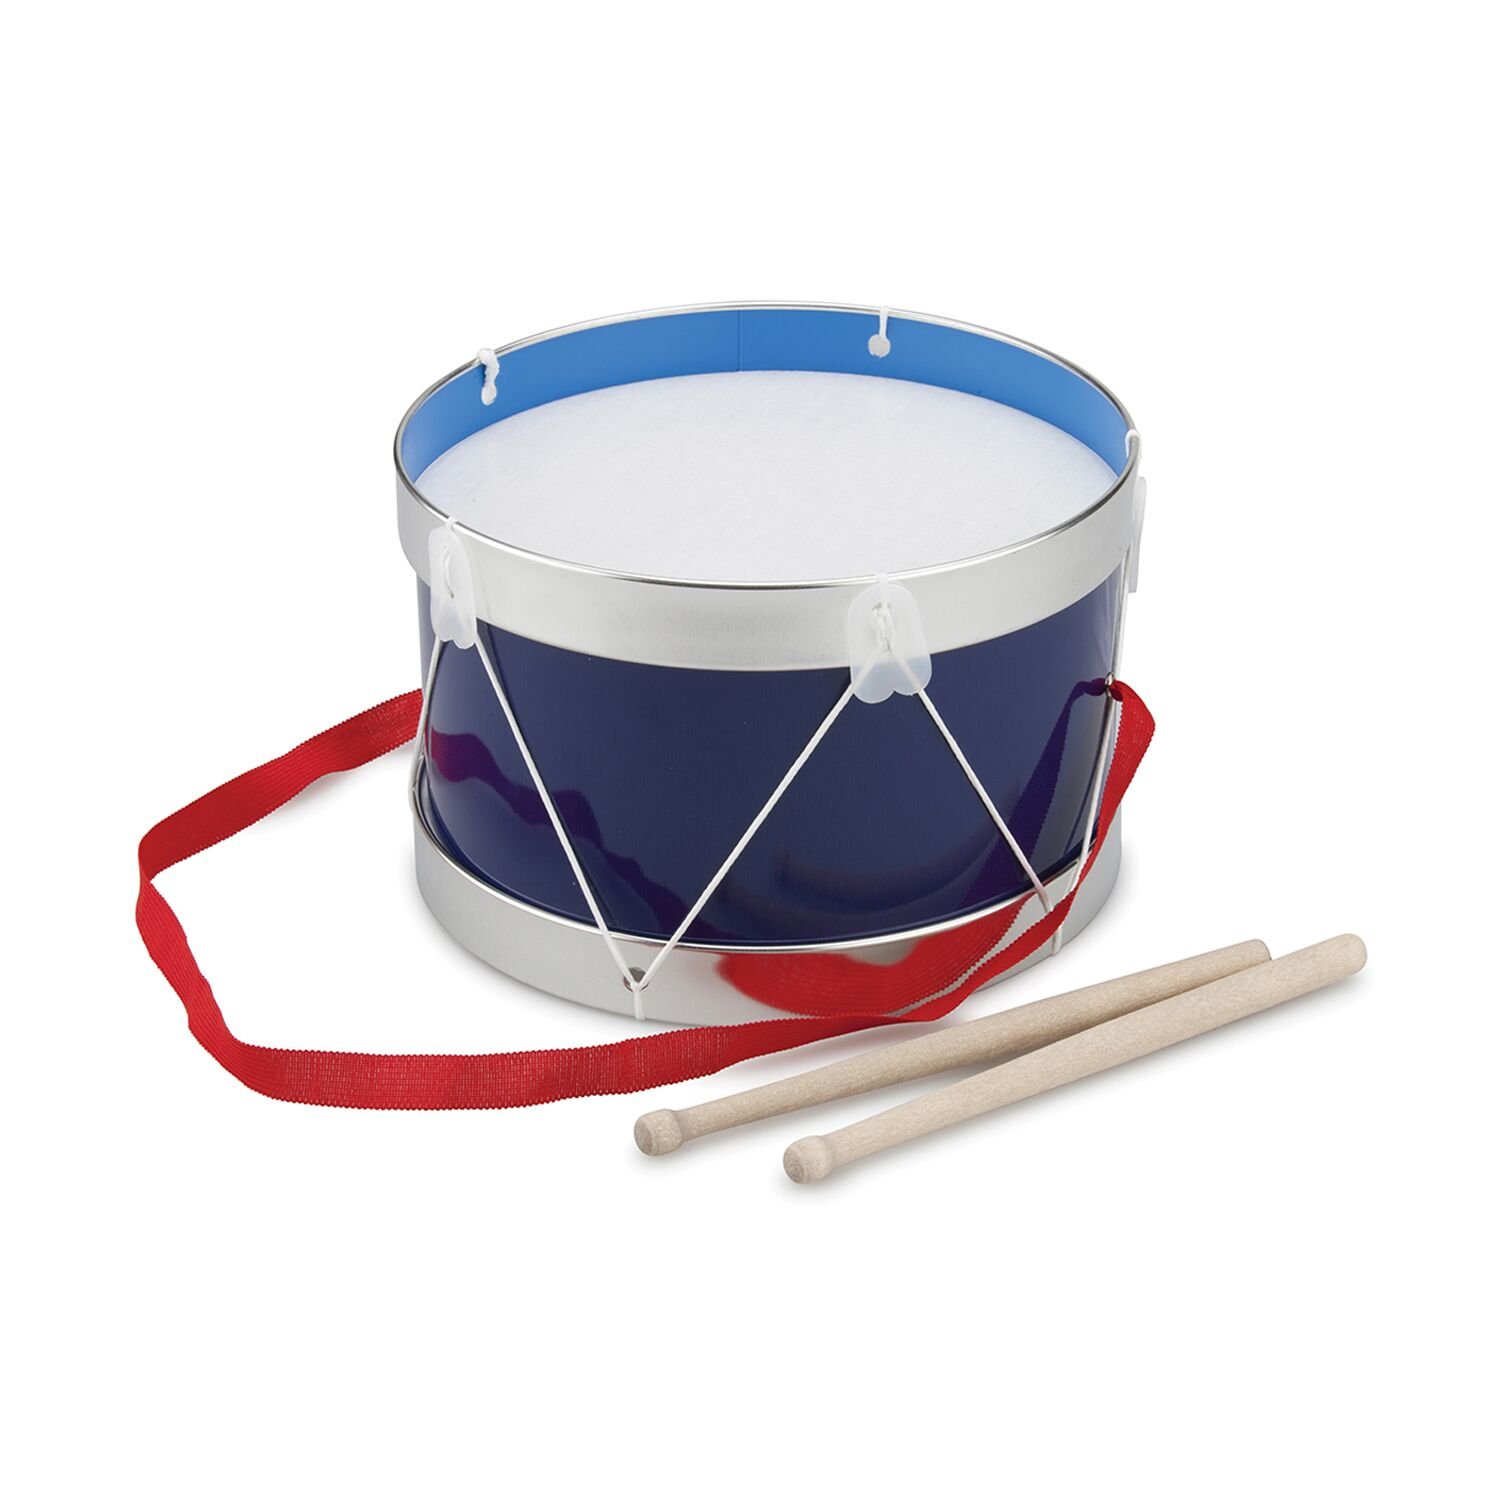 New Classic Toys - Drum - Blue (N10367)